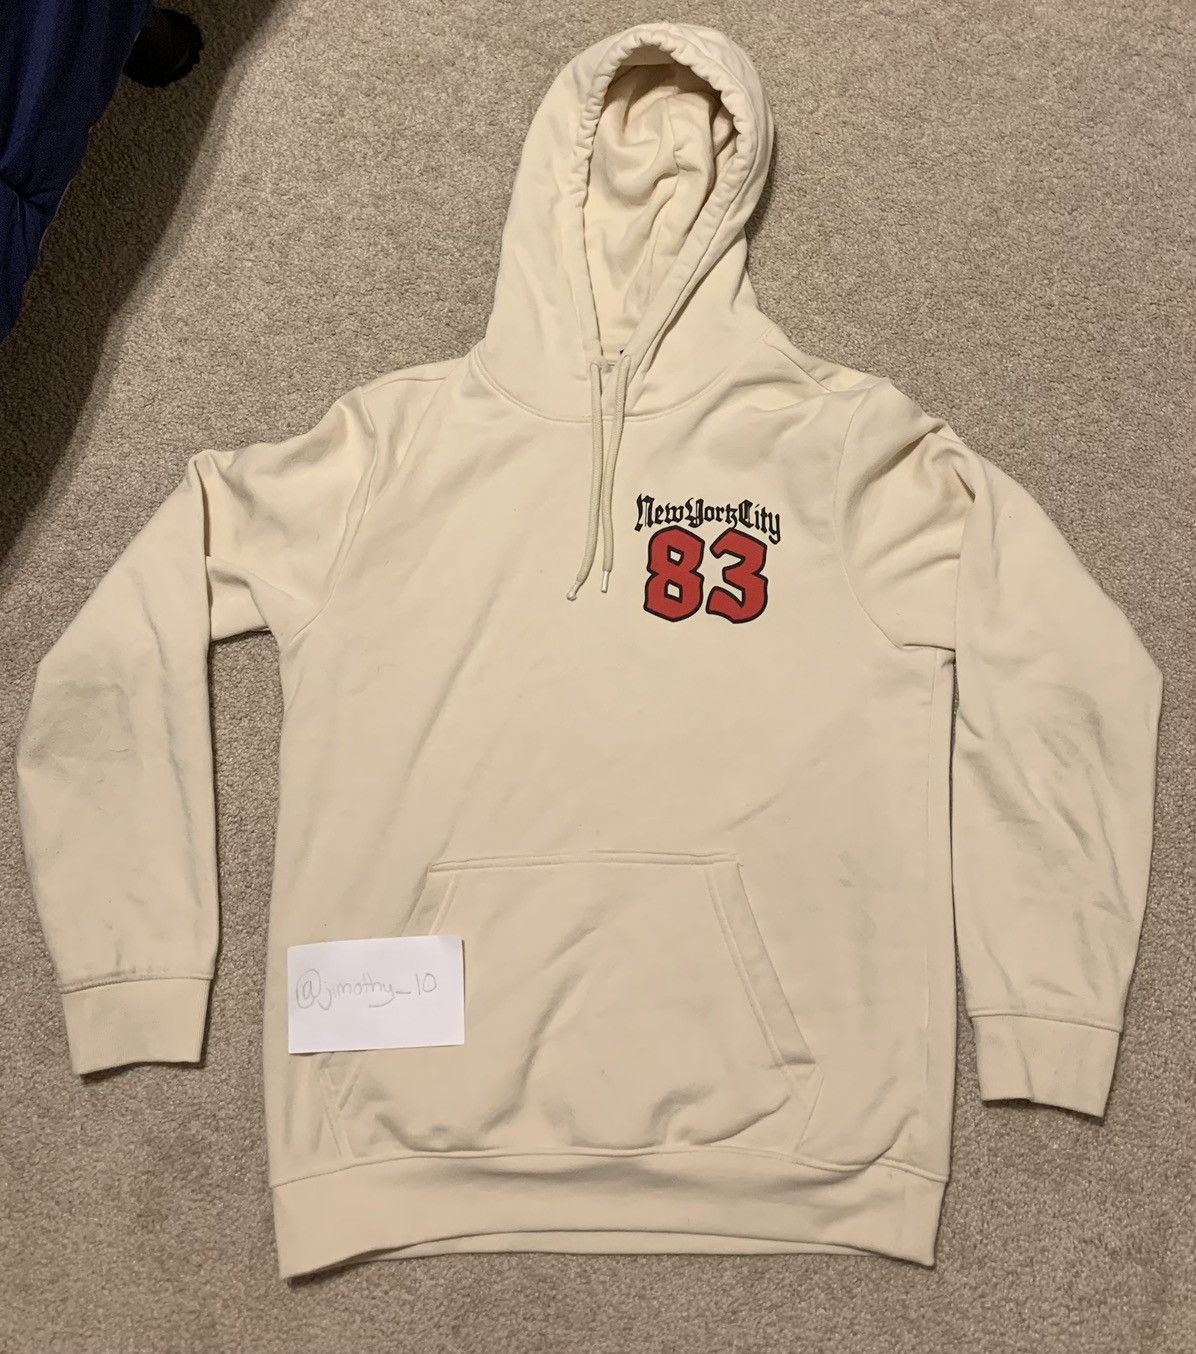 H&M H&M 'NY83' Hoodie Size US M / EU 48-50 / 2 - 1 Preview